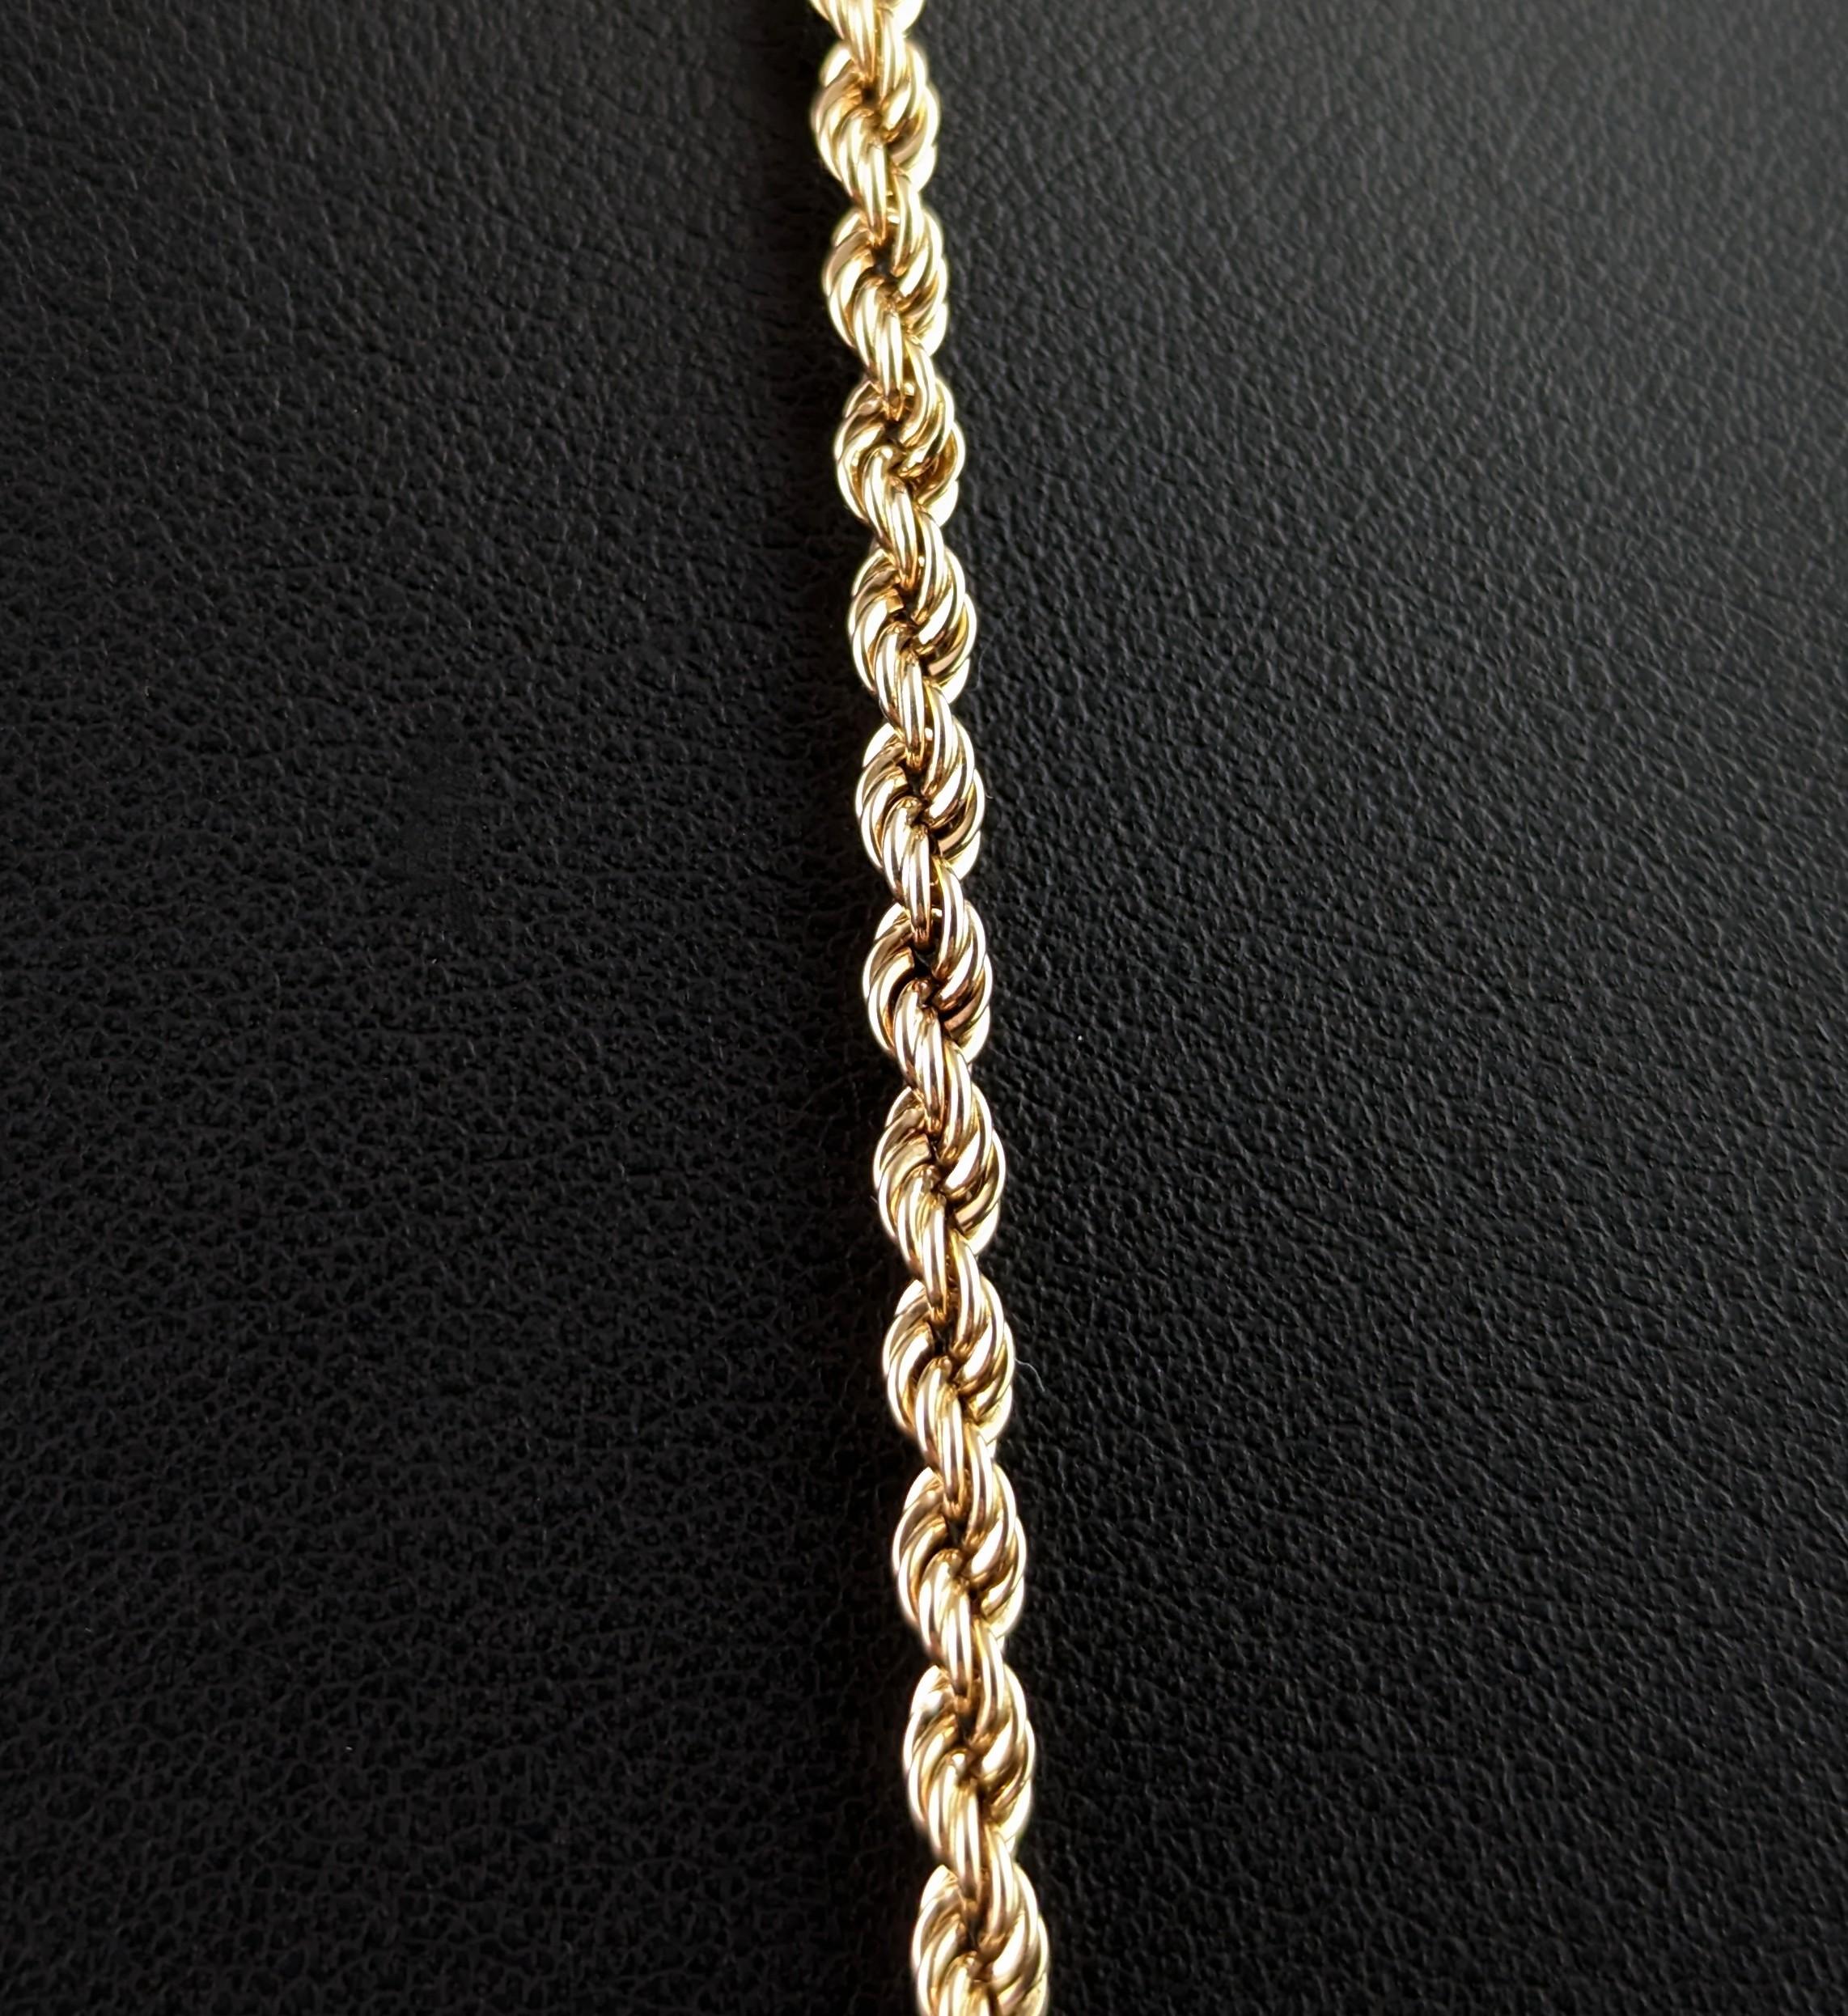 Vintage 9k Gold Rope Twist Chain Necklace, Long  4